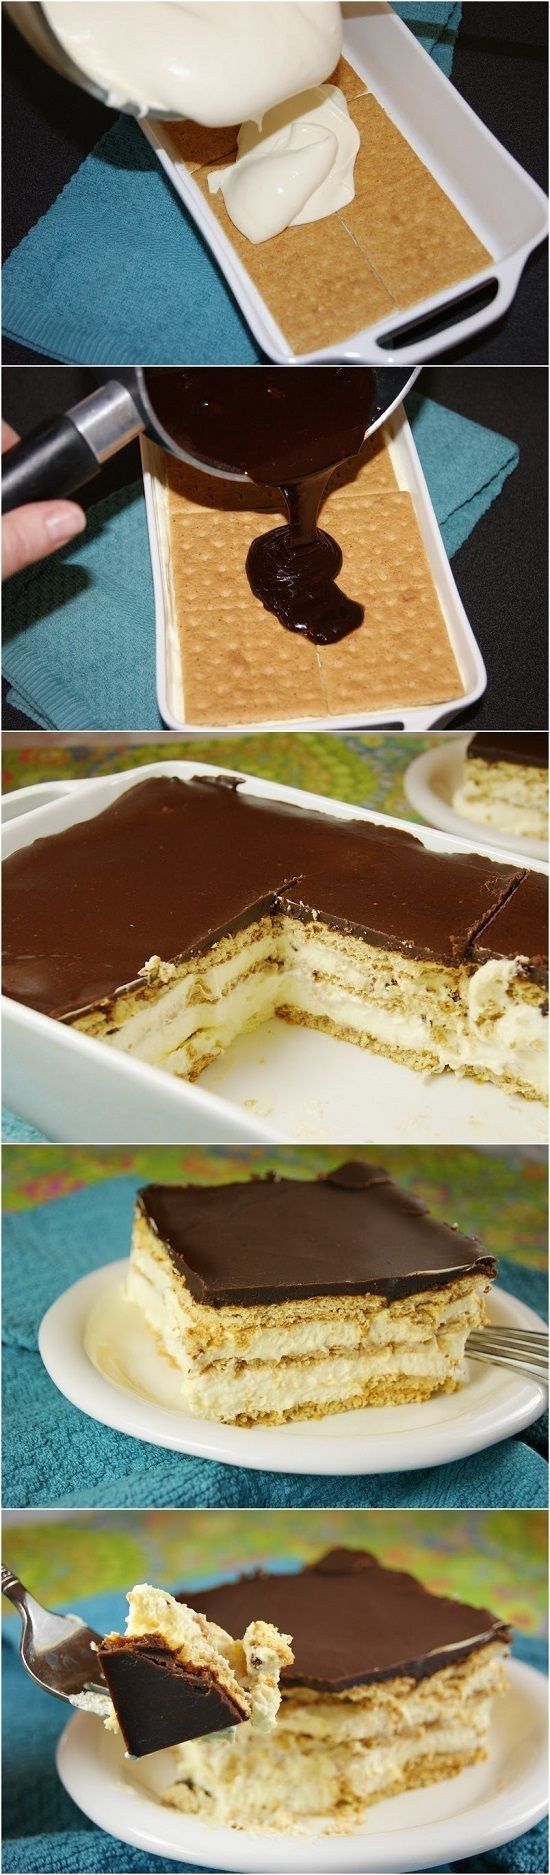 No-Bake Chocolate Eclair Cake | 18 Effortless Sweet Treats For Lazy People